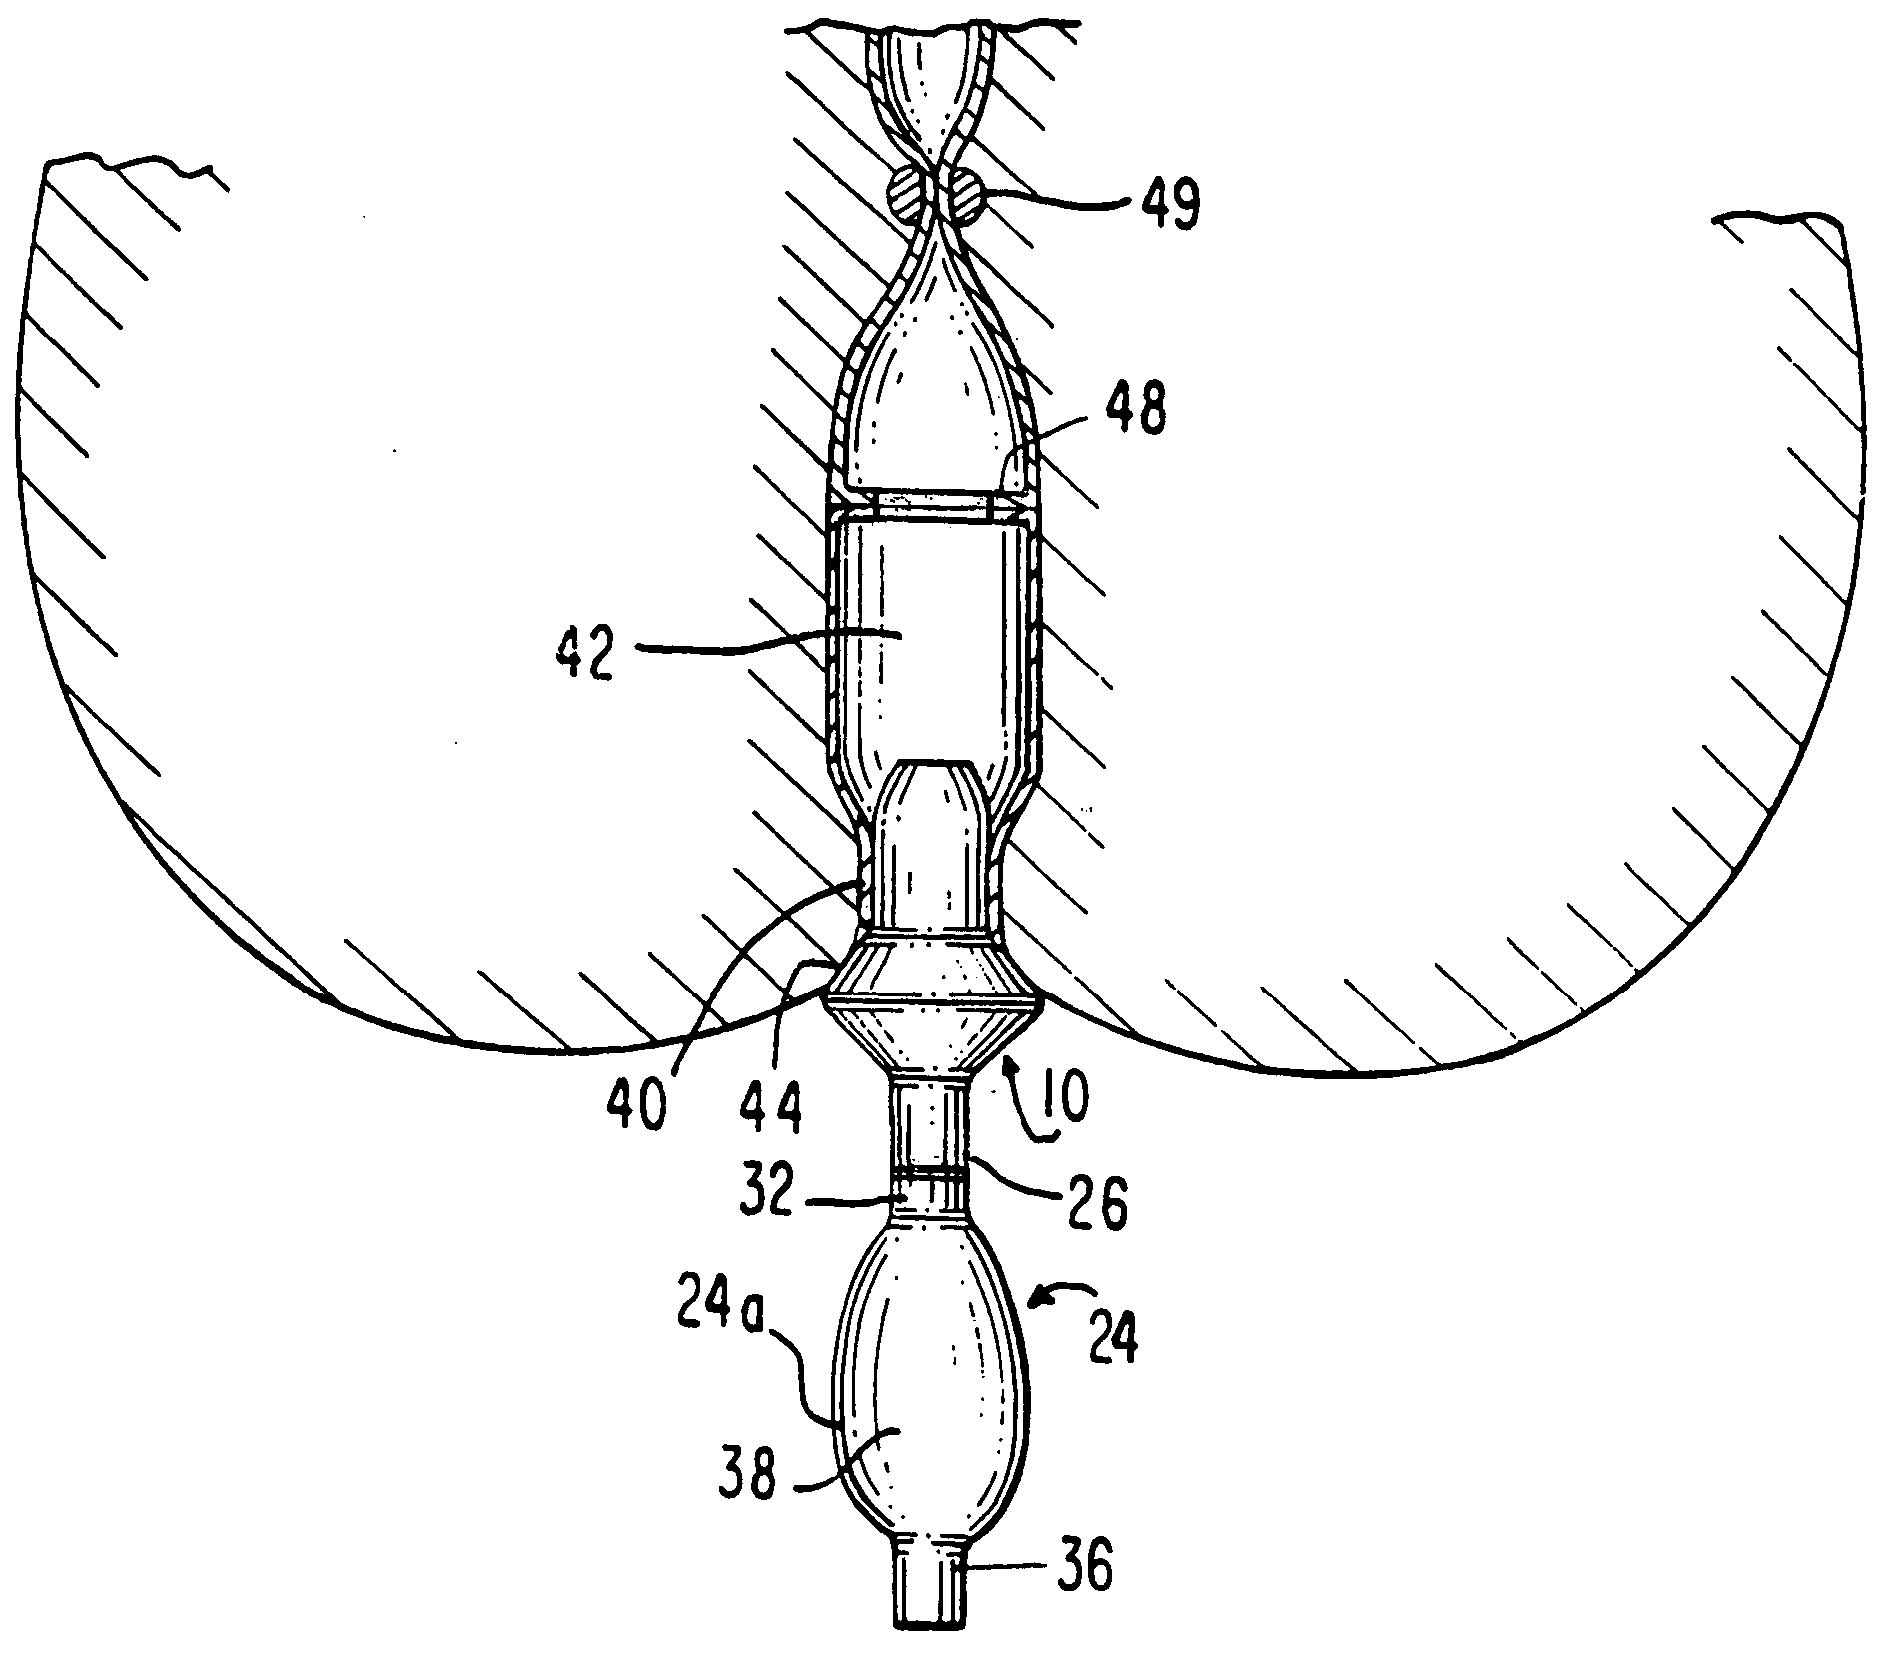 Air introduction device for anastomotic leak testing